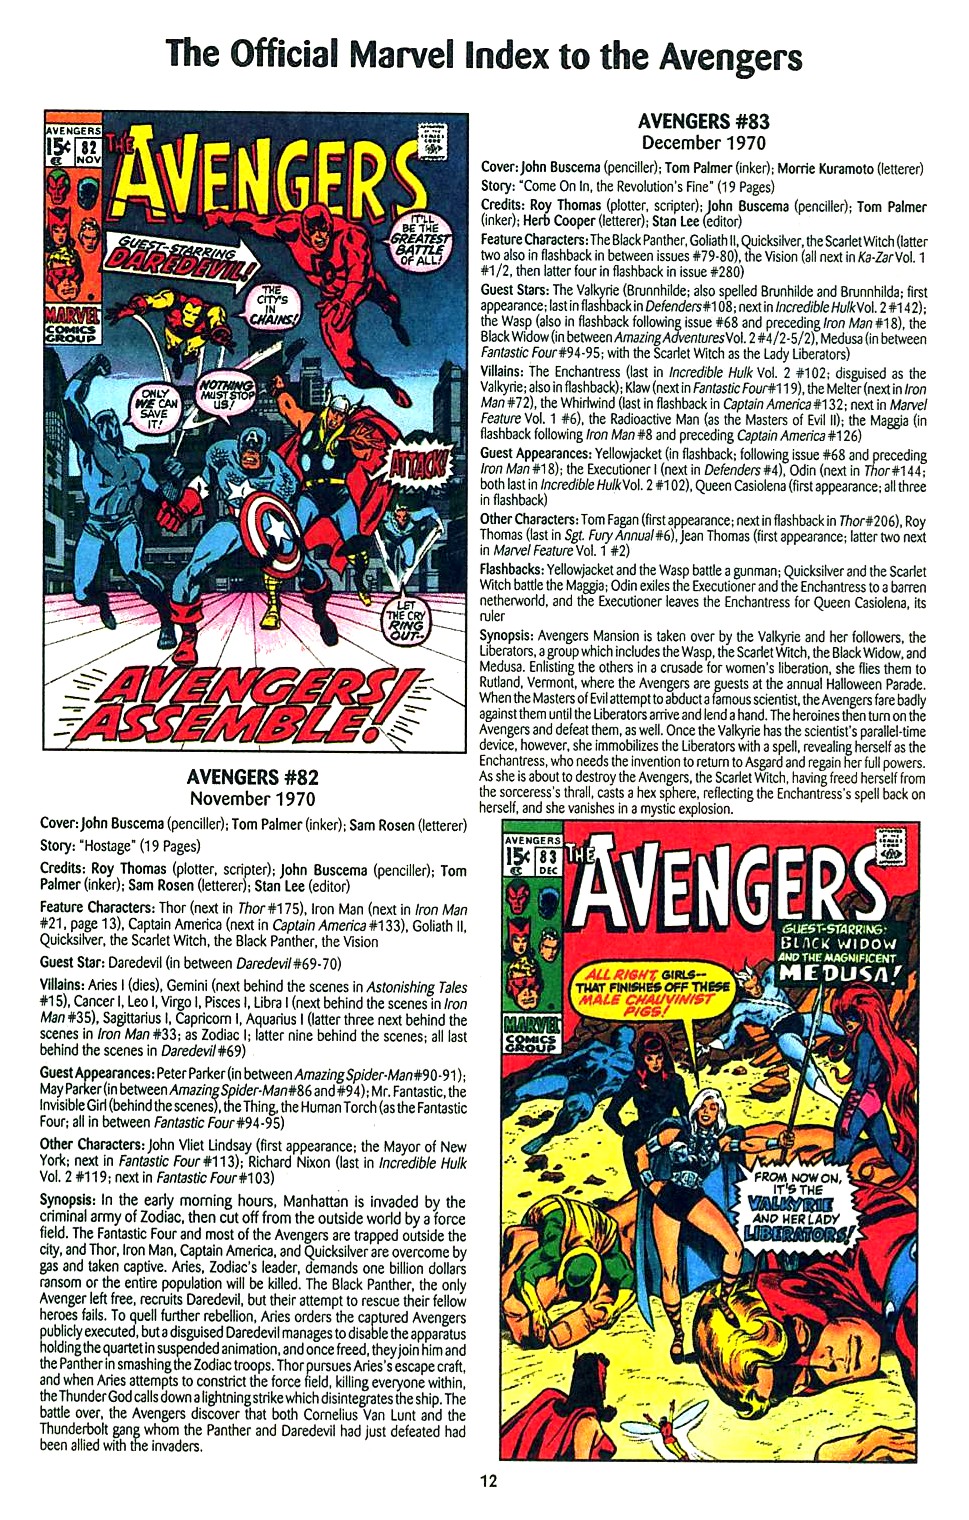 Read online The Official Marvel Index to the Avengers comic -  Issue #2 - 14